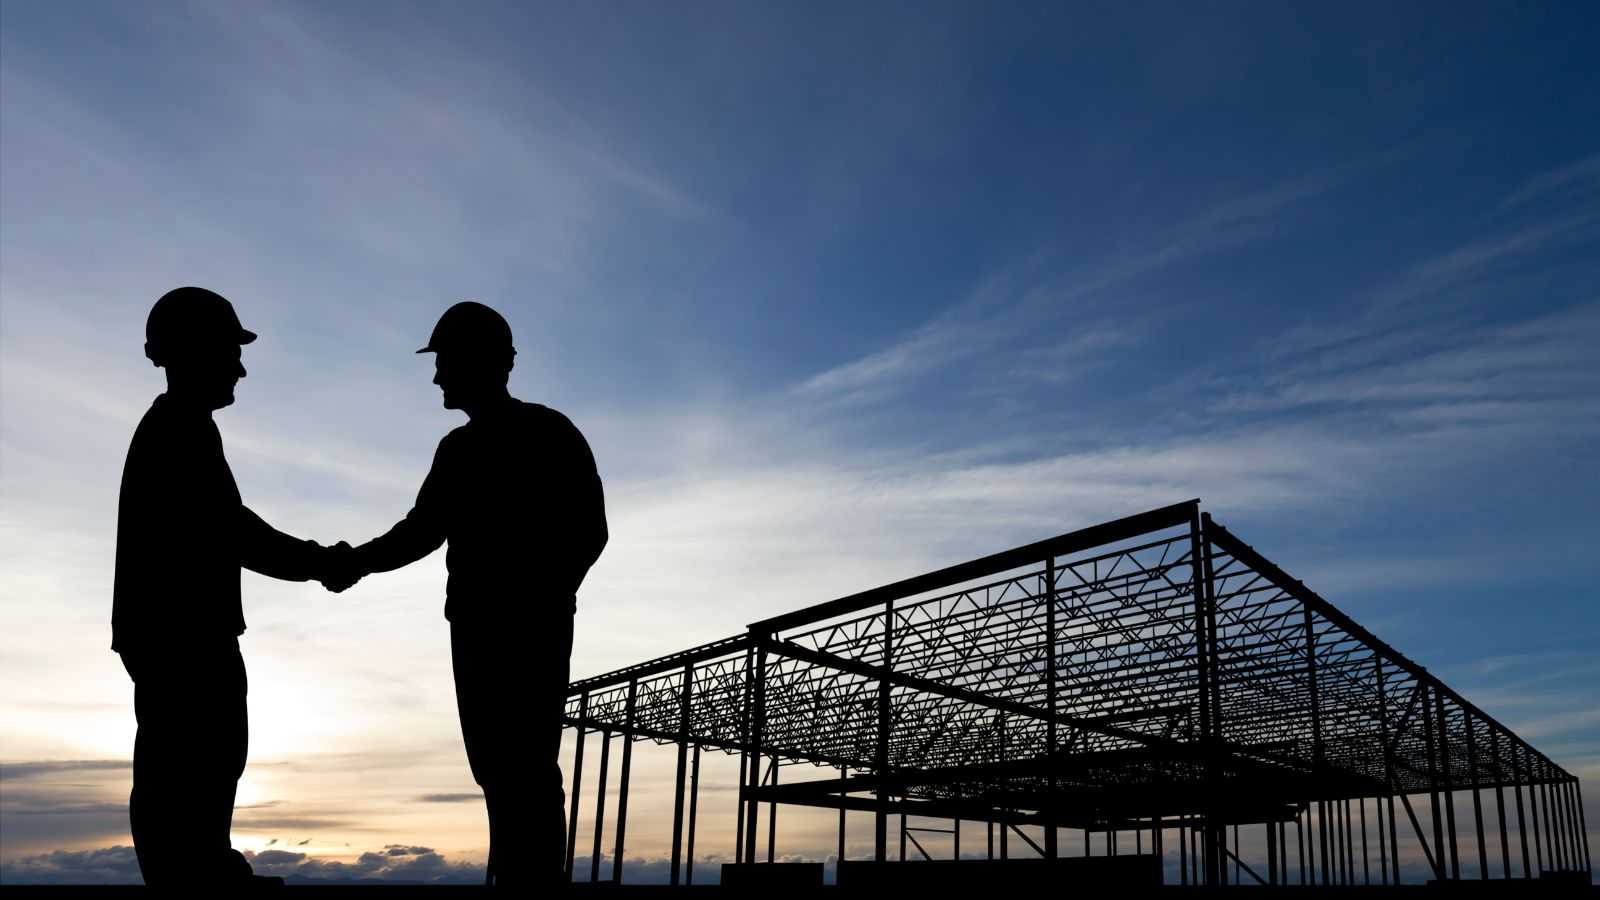 silhouette of two men shaking hands at job site